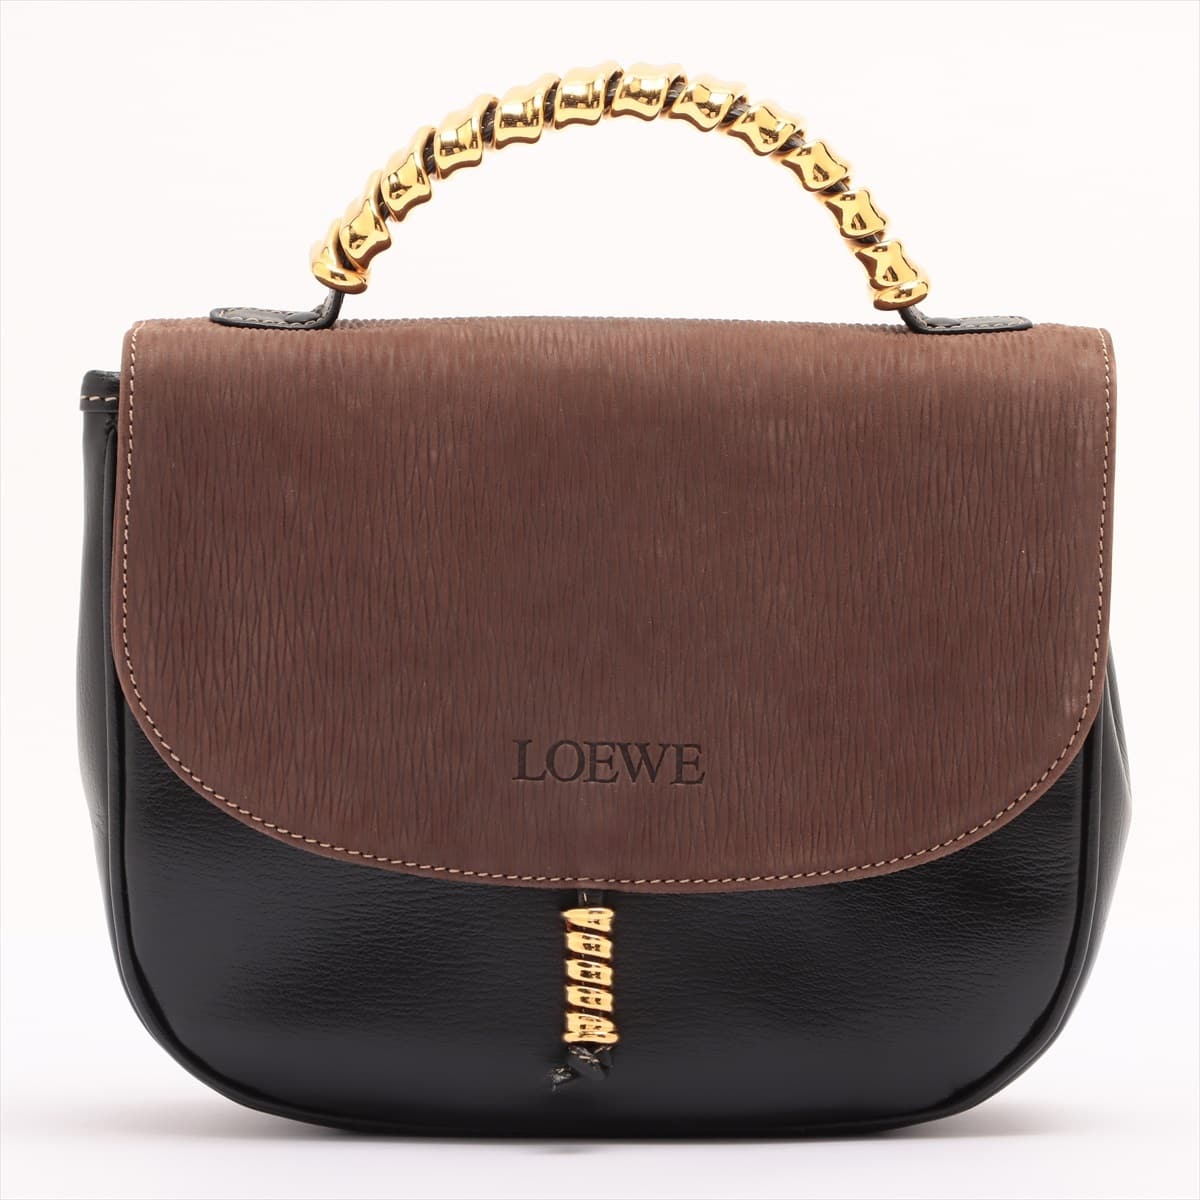 Loewe Velazquez Leather 2way shoulder bag Black Comes with a coin case